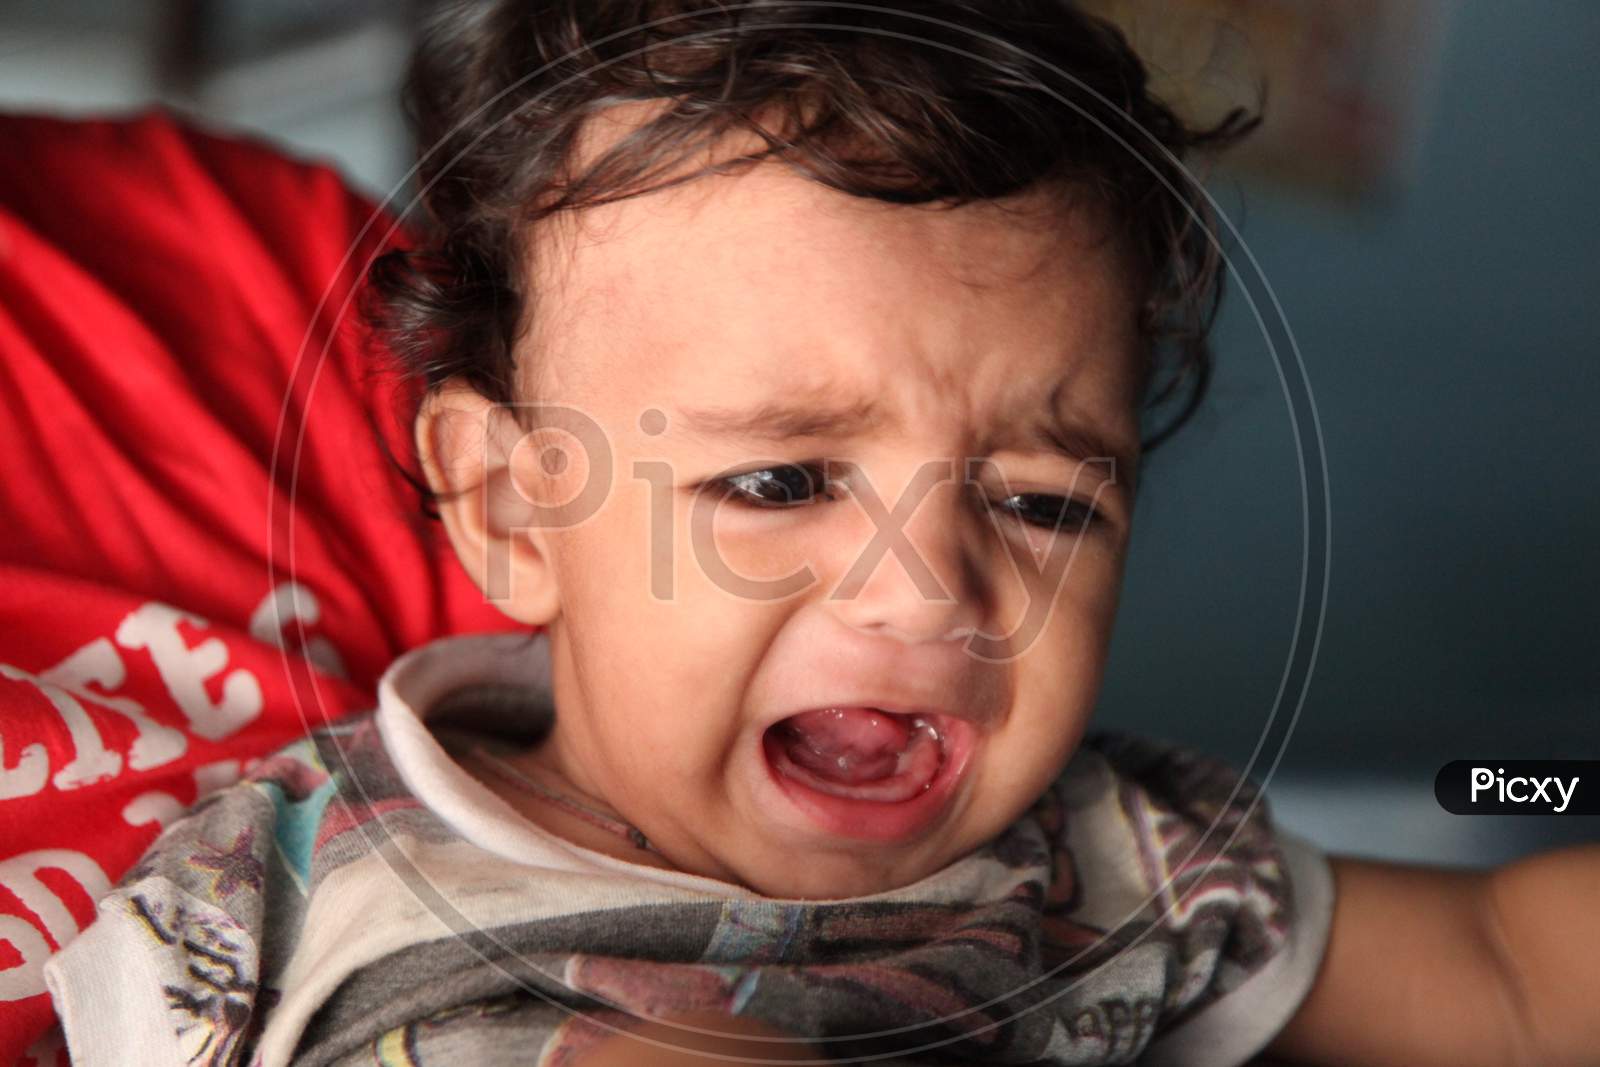 Portrait of an Indian Kid with Crying Face